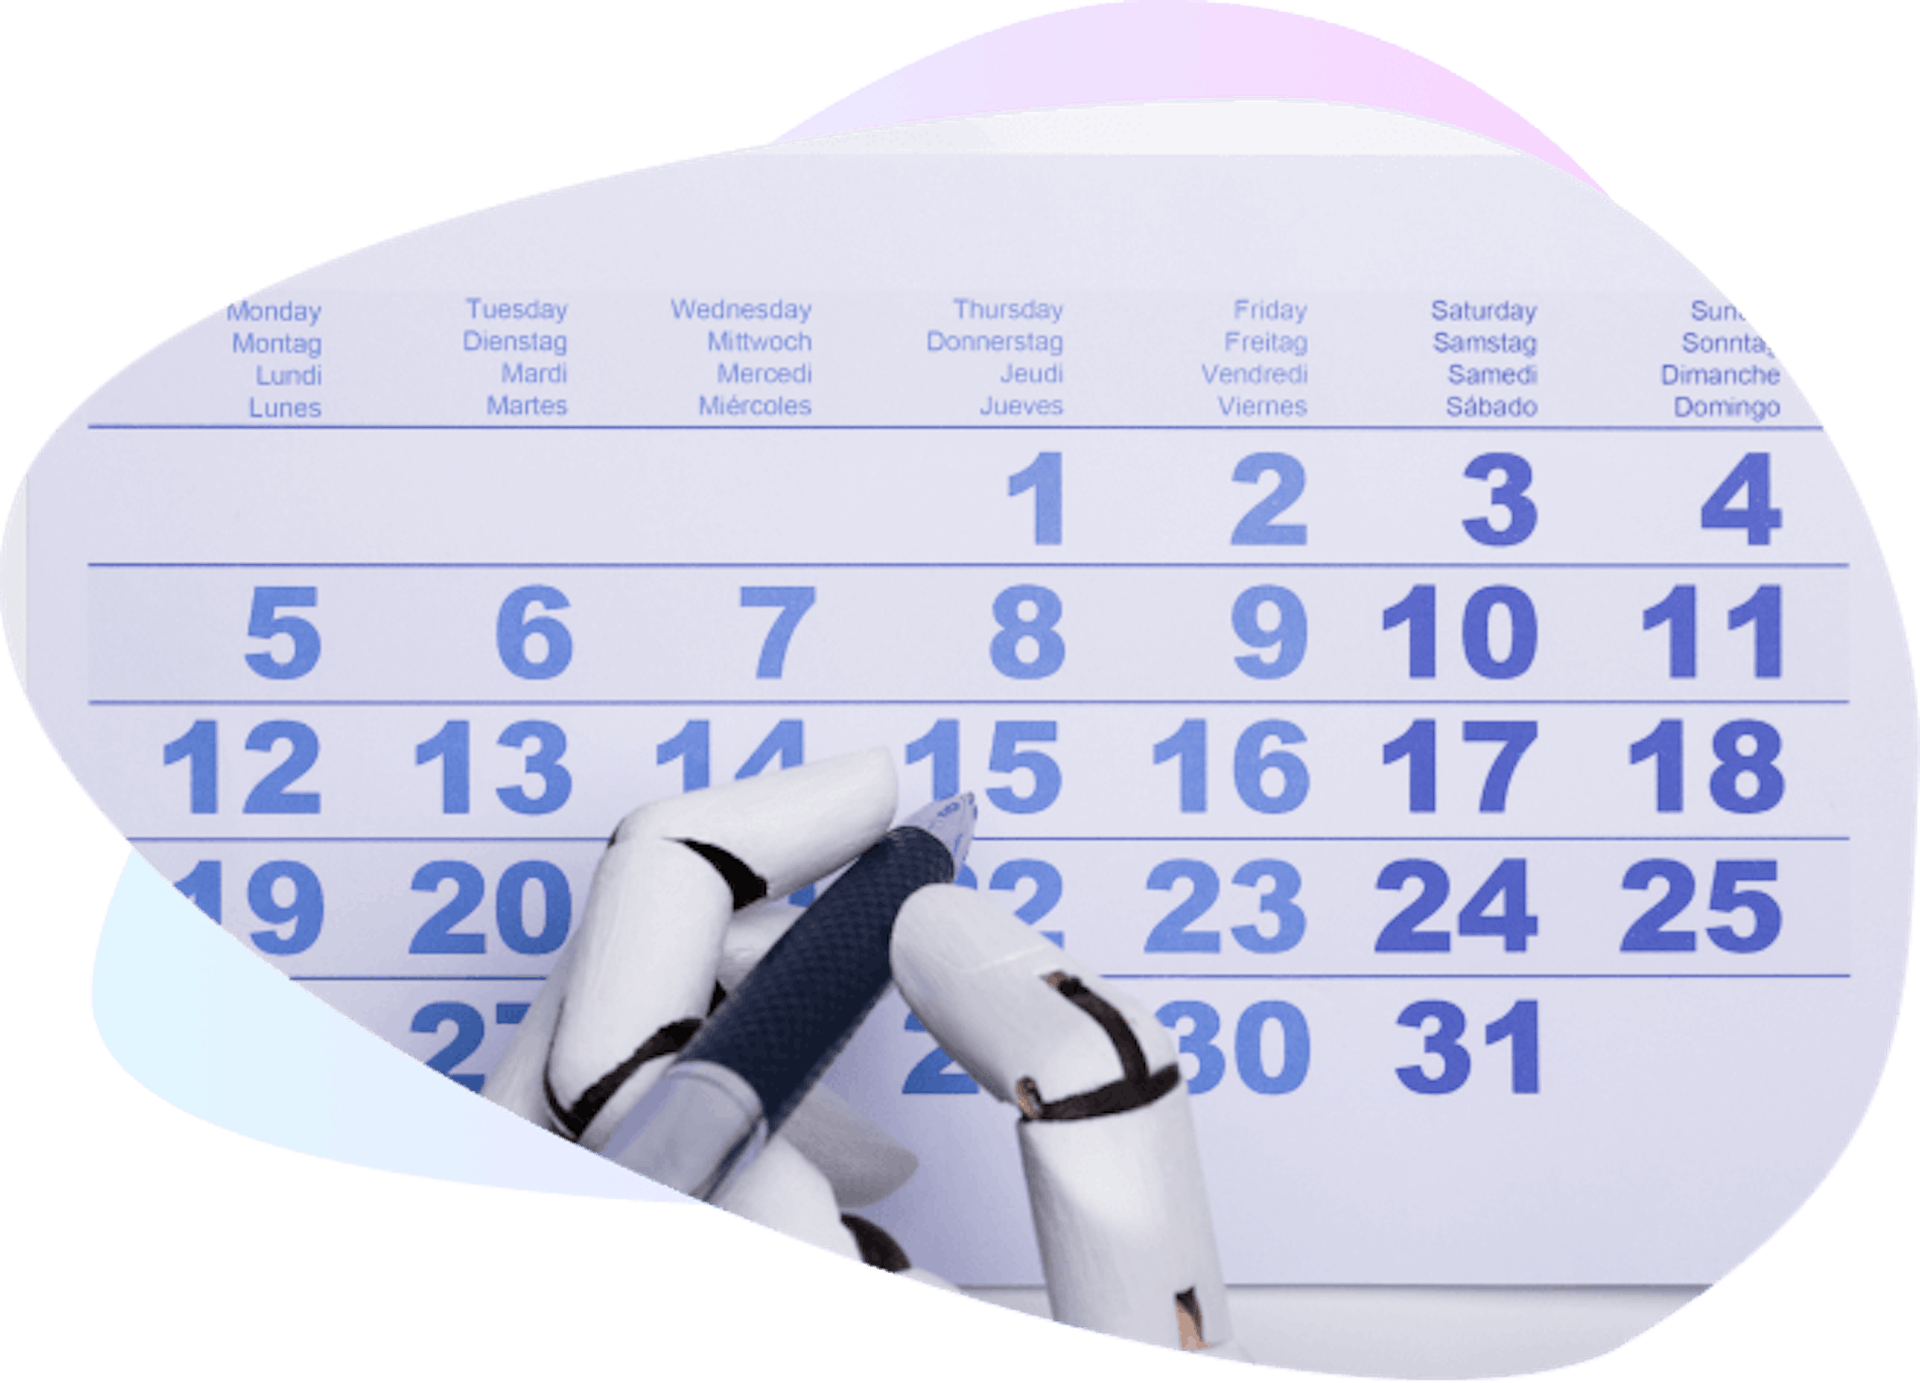 Increase you business efficiency through AI-powered scheduling